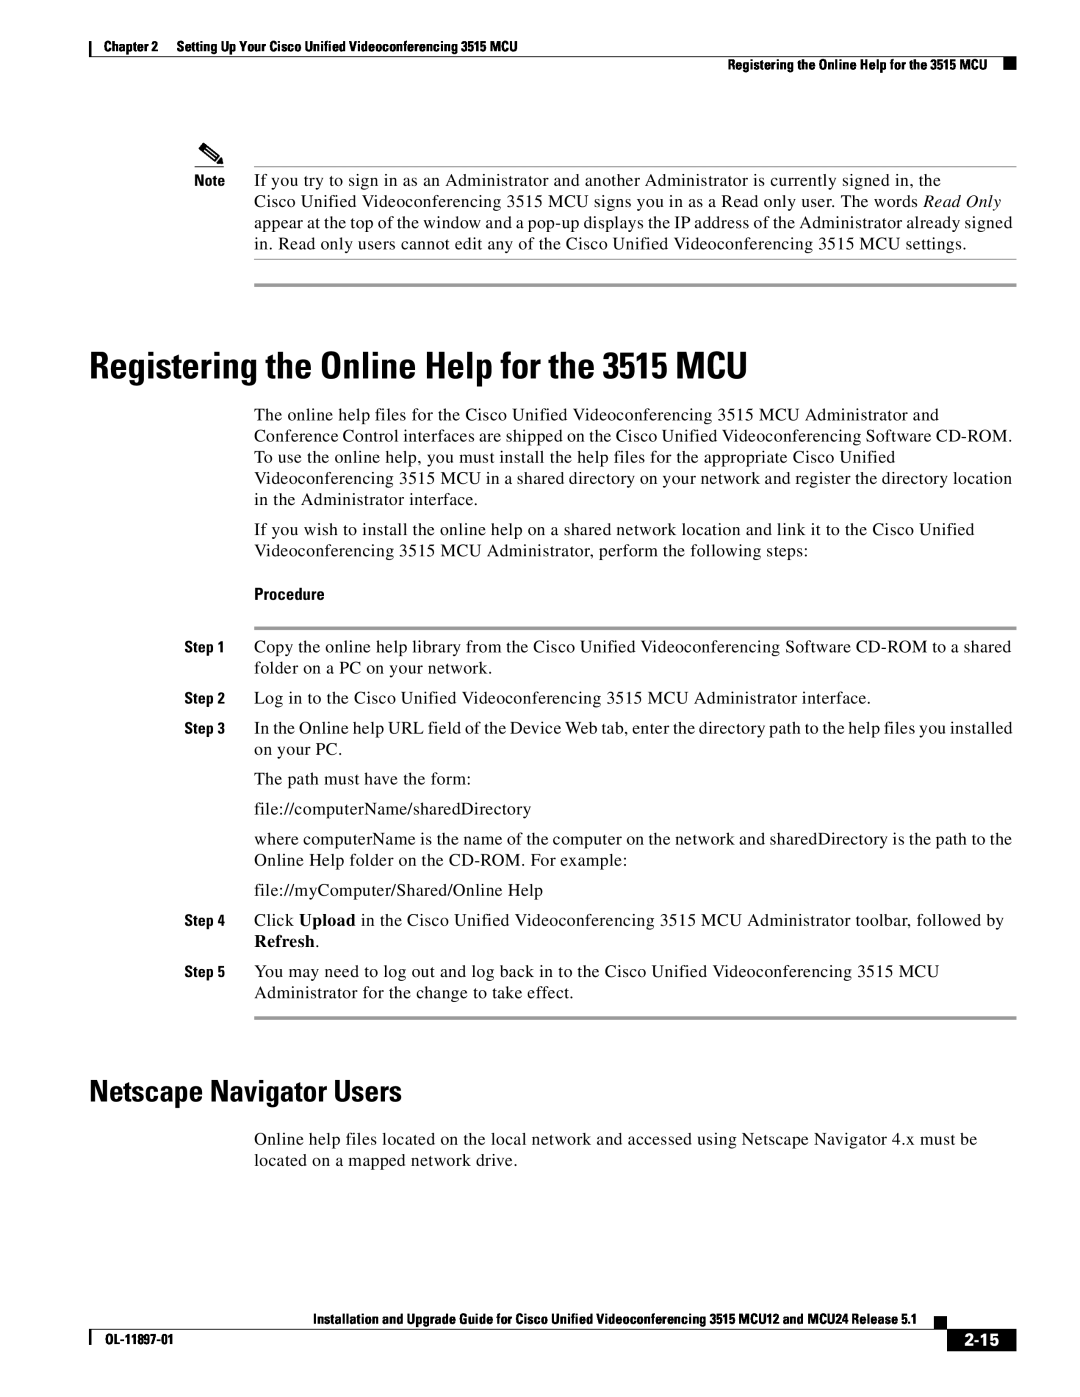 Cisco Systems MCU24 manual Registering the Online Help for the 3515 MCU, Netscape Navigator Users, 2-15 